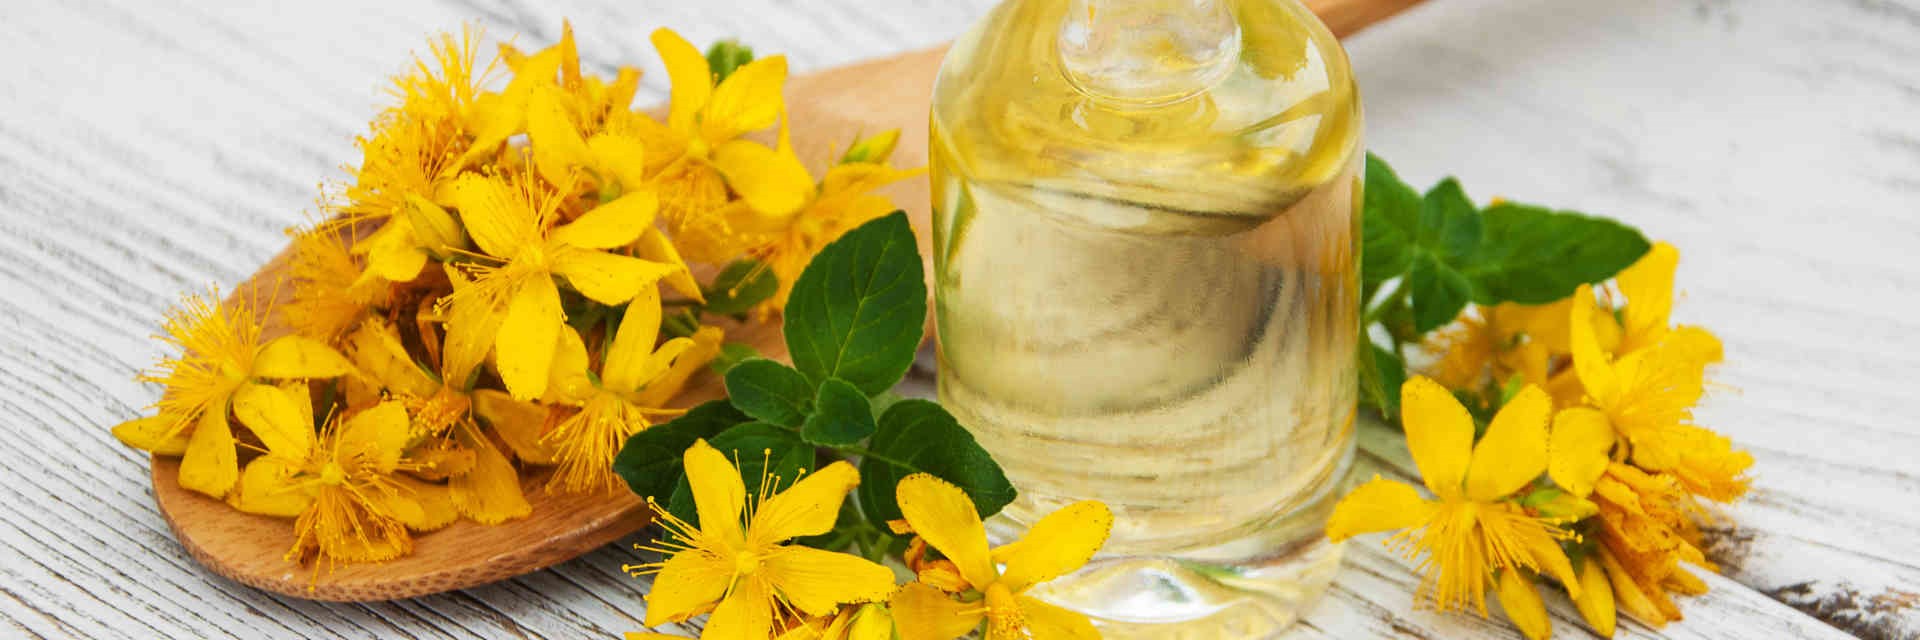 St John's Wort flowers and extract